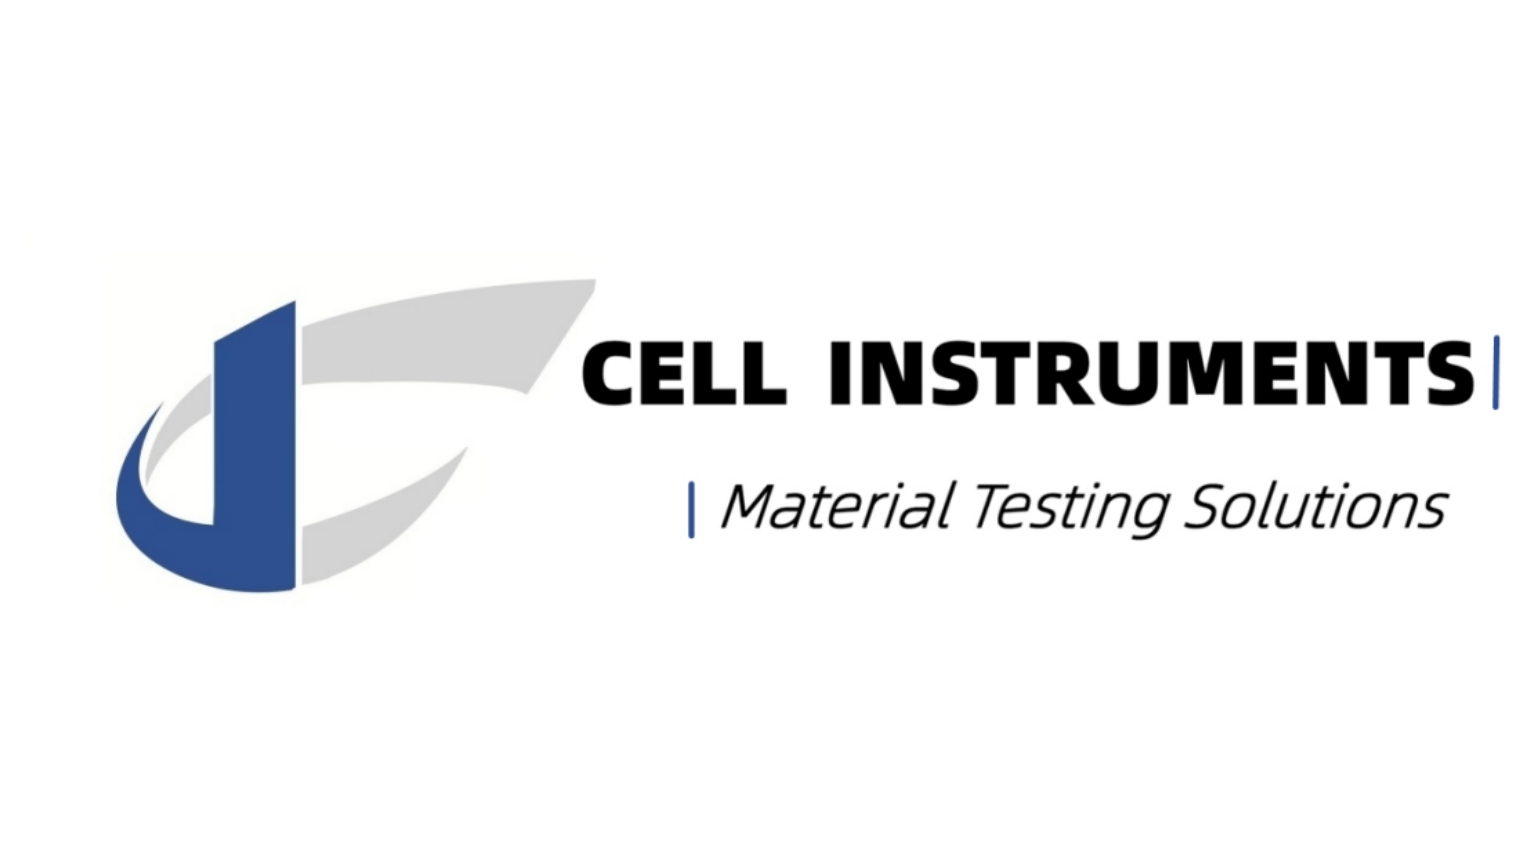 Cell Instruments Co., Ltd